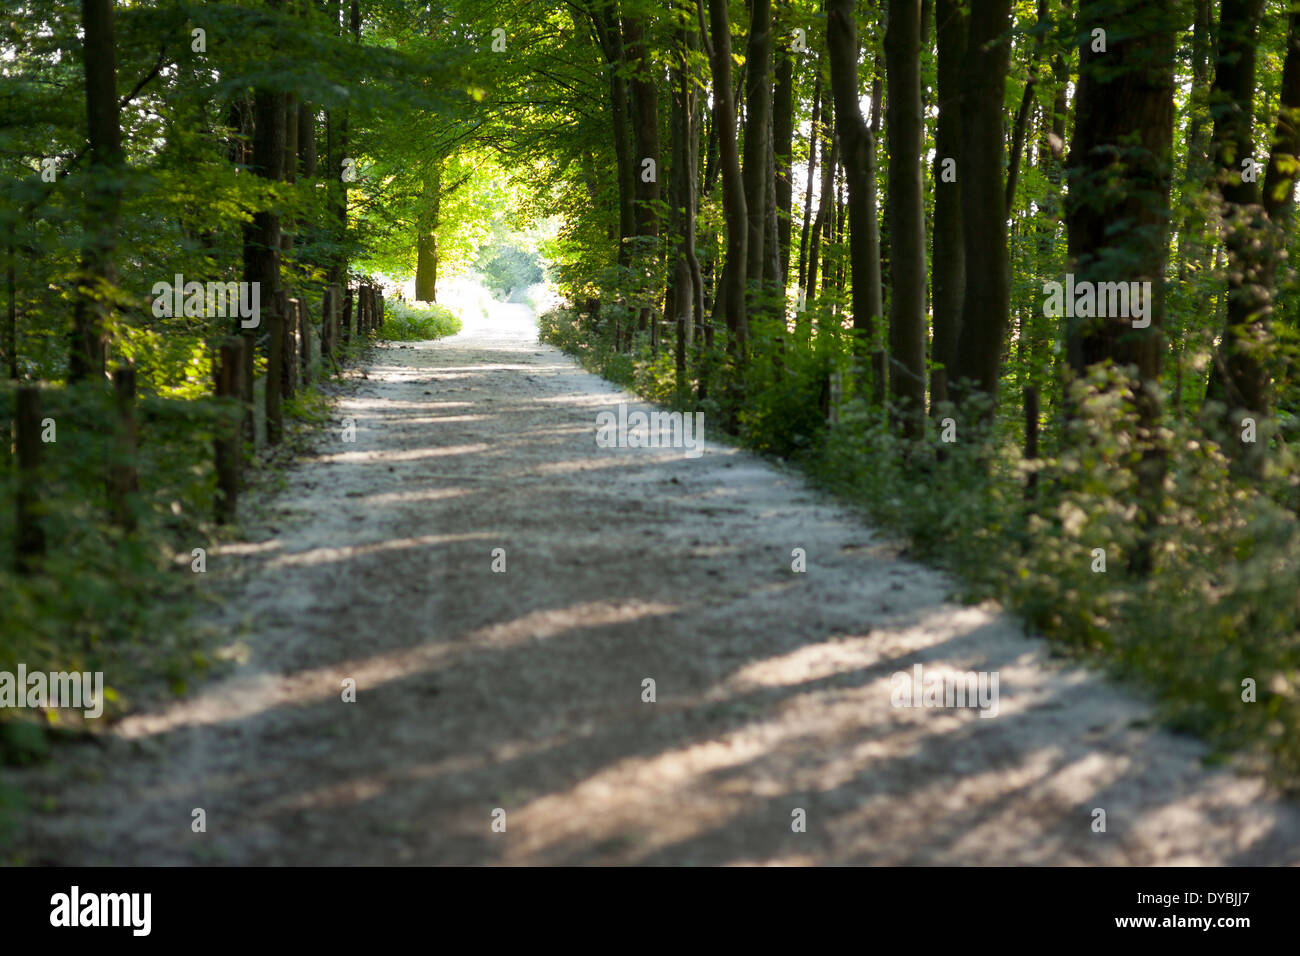 Dirt road leading through the trees into the sun with selective focus. The white stuff on the ground is pollen from the trees. Stock Photo